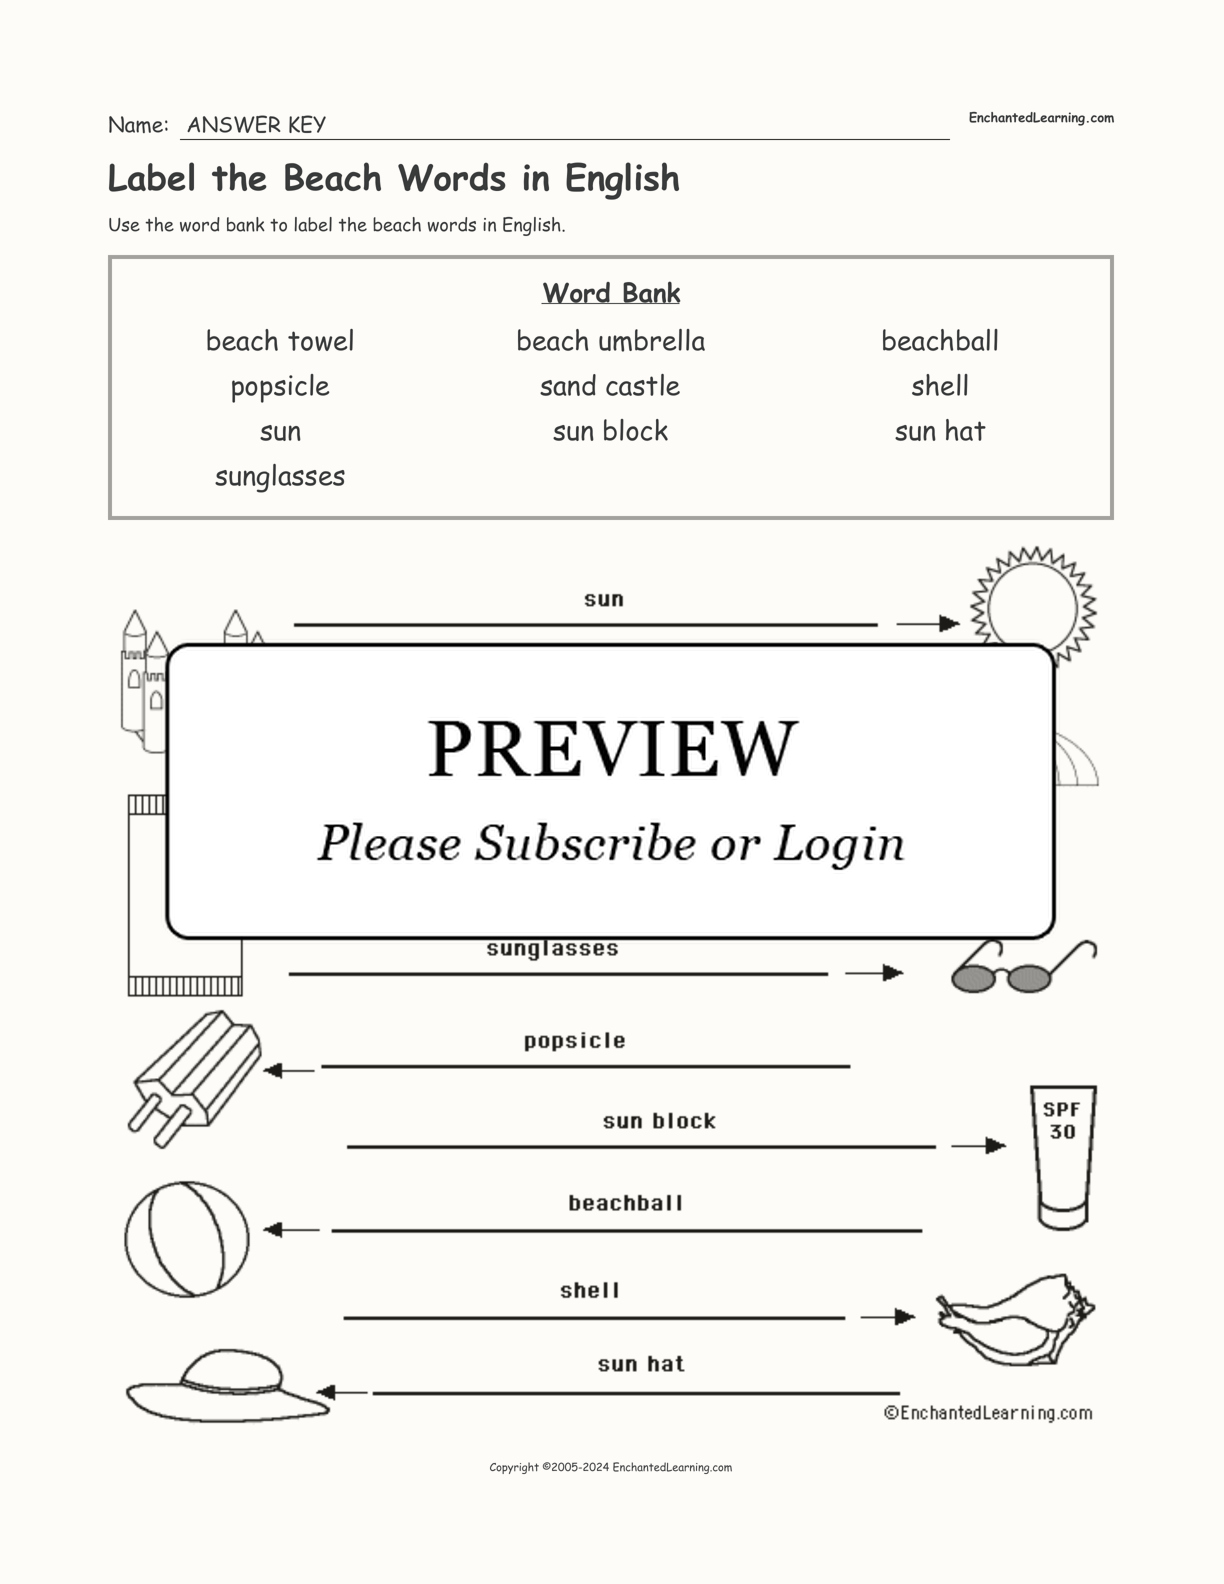 Label the Beach Words in English interactive worksheet page 2